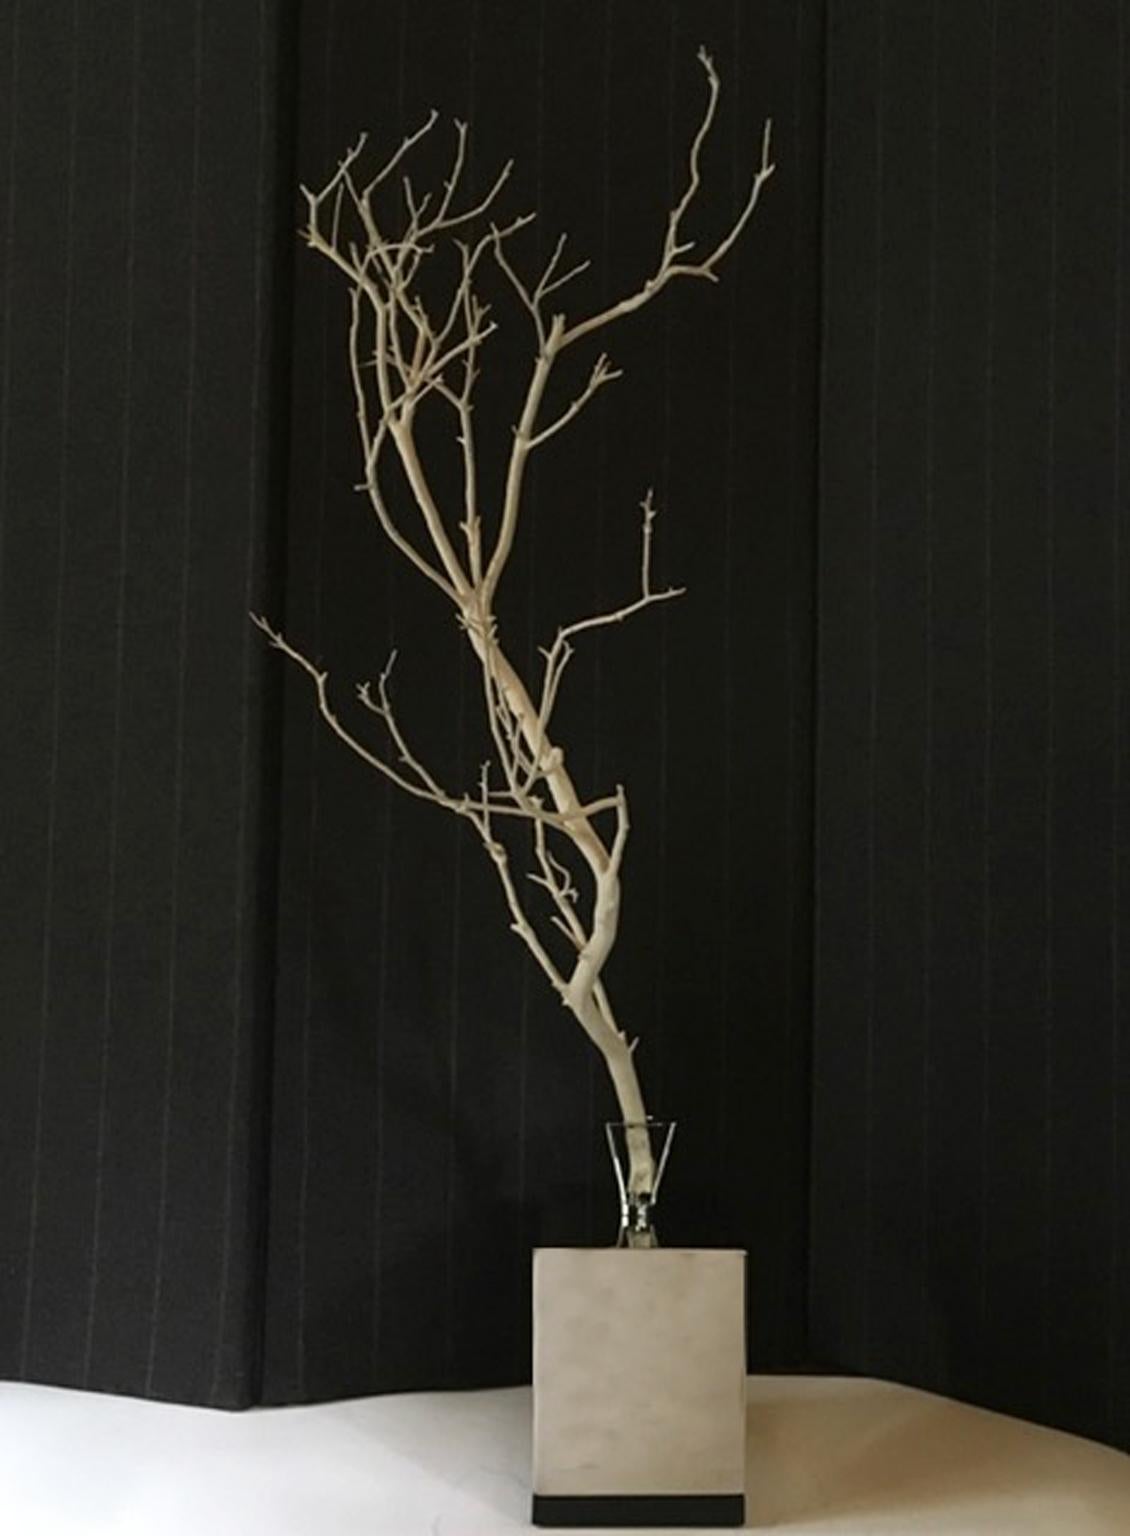 Natural abstract white birch branch on a chrome stand in Italian design 21th Century

This is a white mat lacquered natural birch branch mounted on a metal chrome stand with a black wood base. The branch is removable and the base can be used with